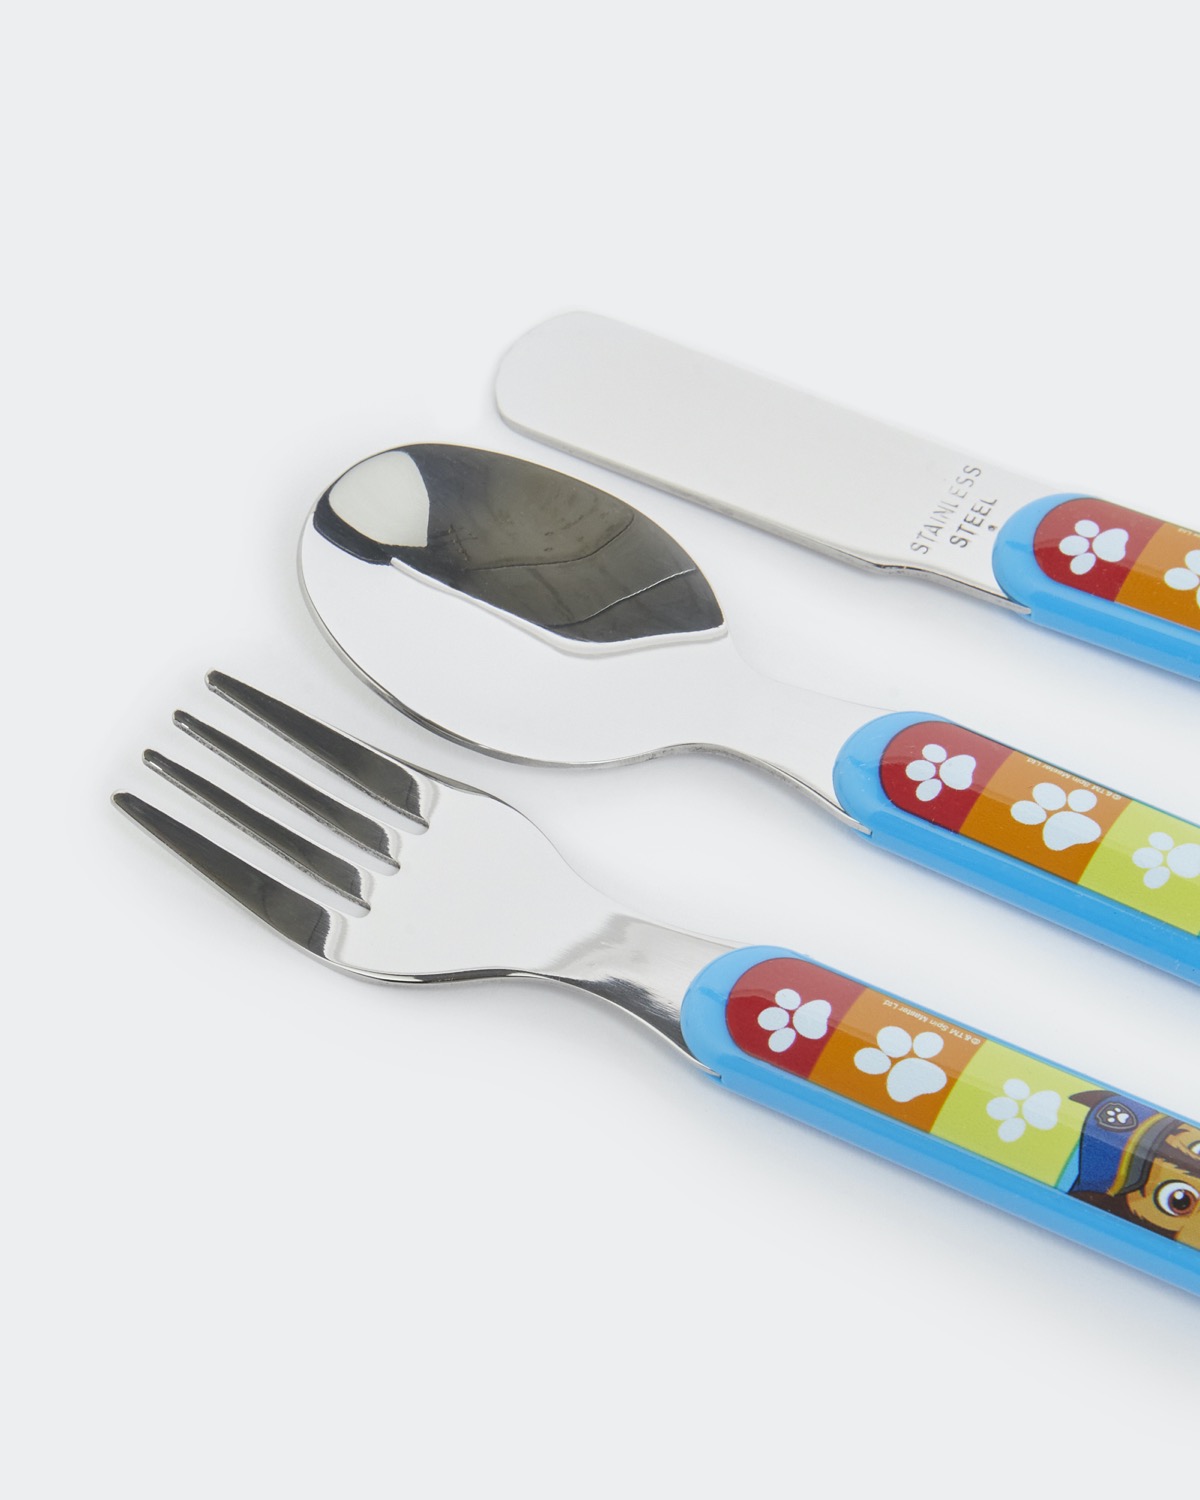 Paw Patrol 3 Piece Cutlery Set – Metal, Reusable Children's Knife, Fork & Spoon, Kids-Size, Made from Food-Safe Stainless Steel & ABS Plastic –